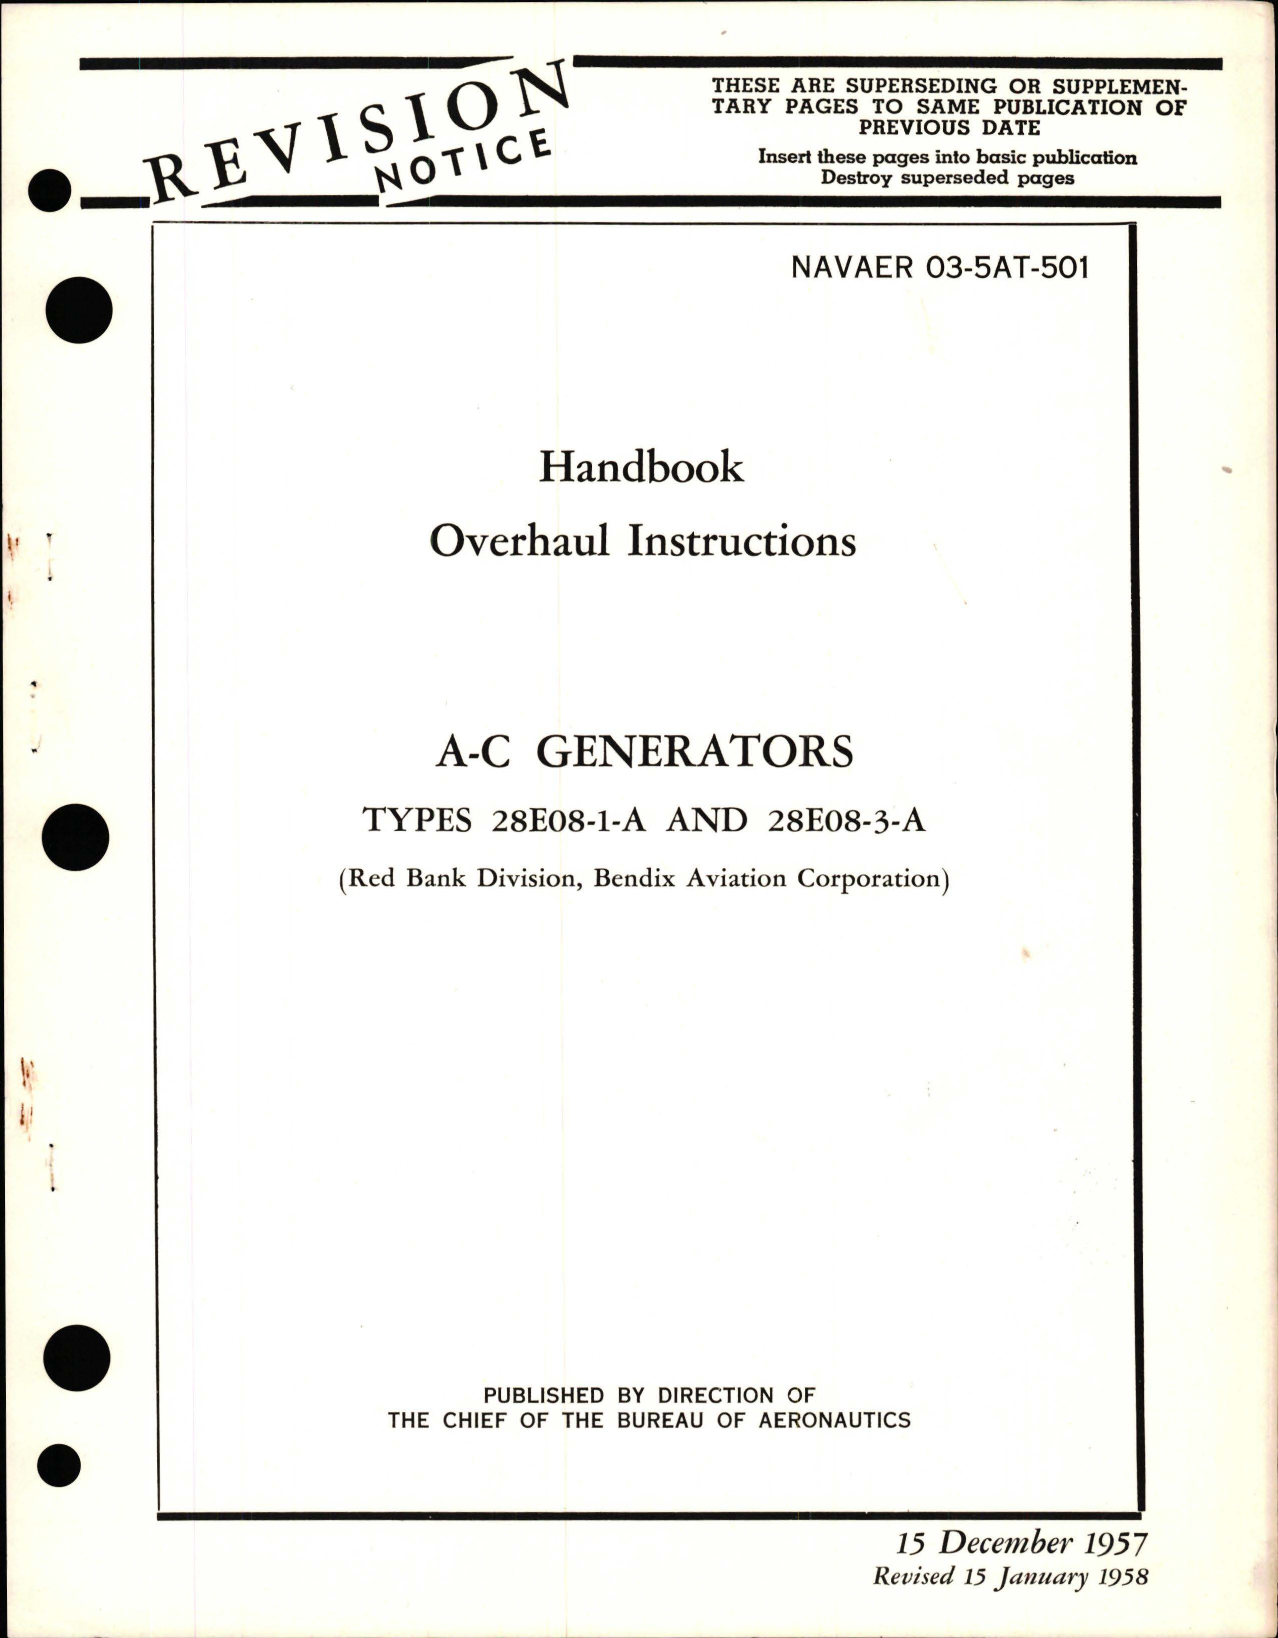 Sample page 1 from AirCorps Library document: Overhaul Instructions for A-C Generators for Types 28E08-1-A and 28E08-3-A